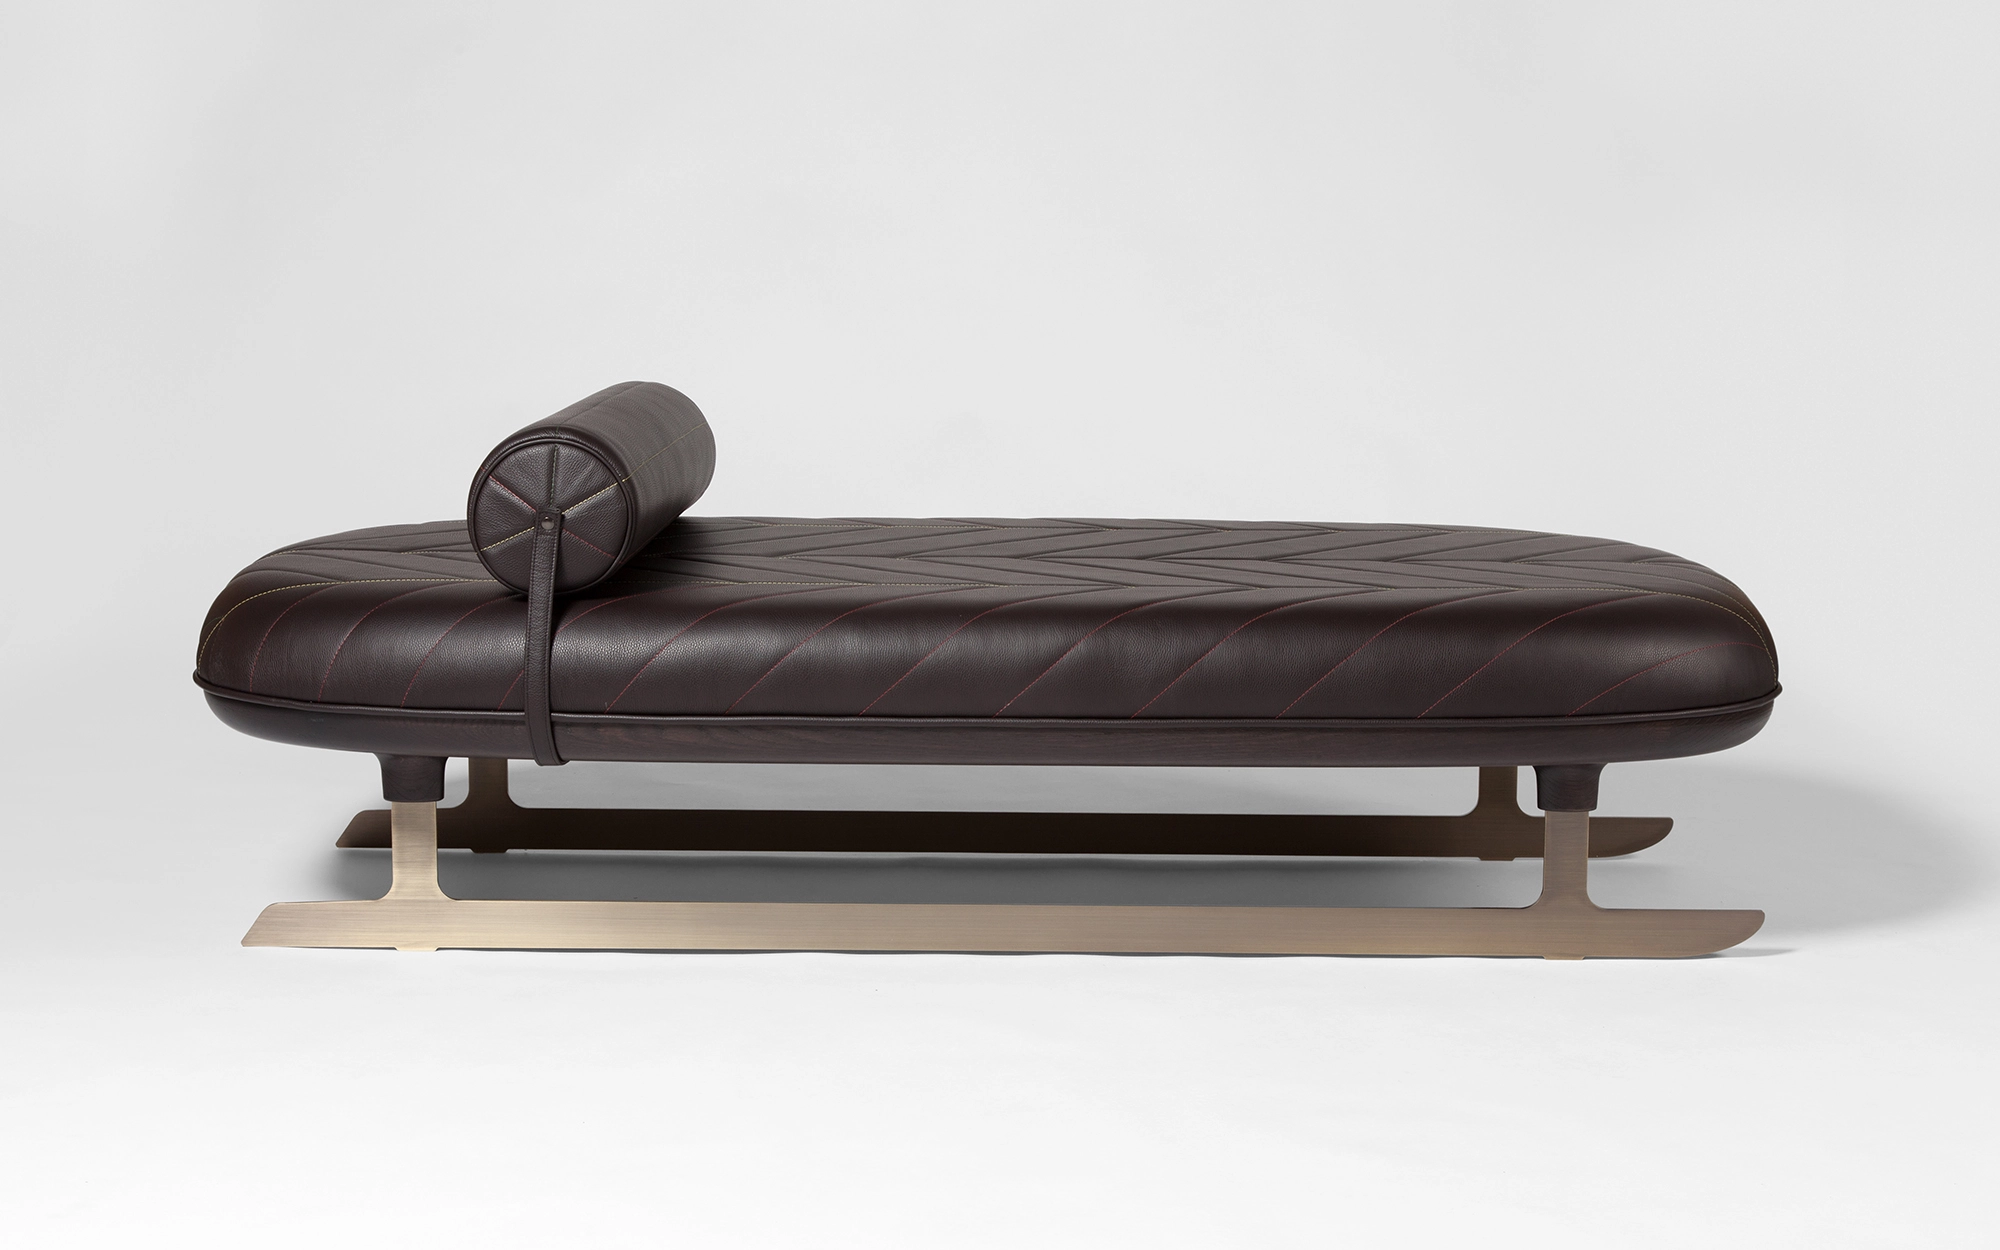 Ice-skating Daybed - Jaime Hayon - bench daybed-and-long-chair- Galerie kreo